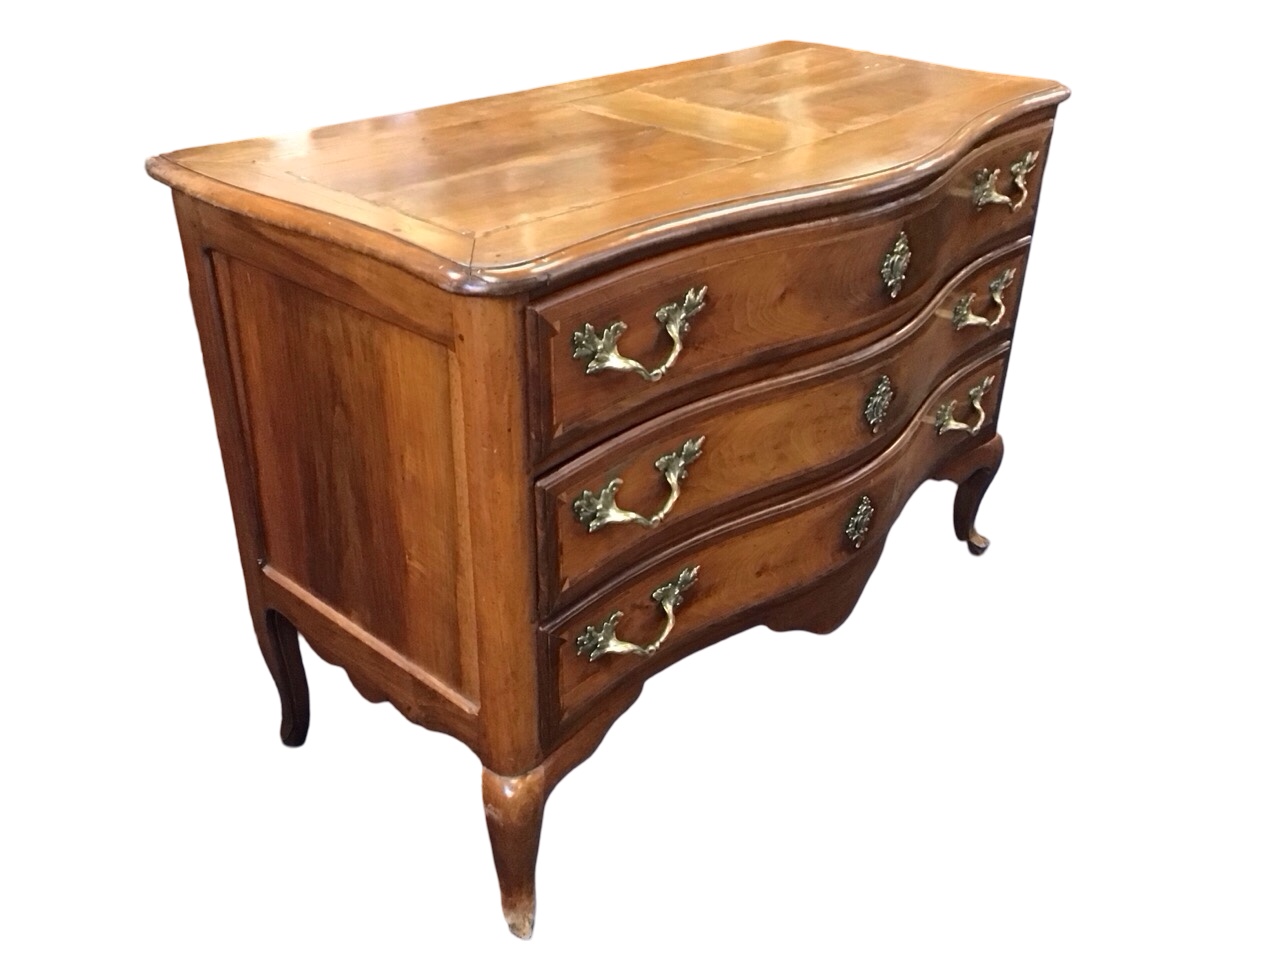 A C18th Italian serpentine fronted walnut commode, probably Piedmontese, with moulded rosewood